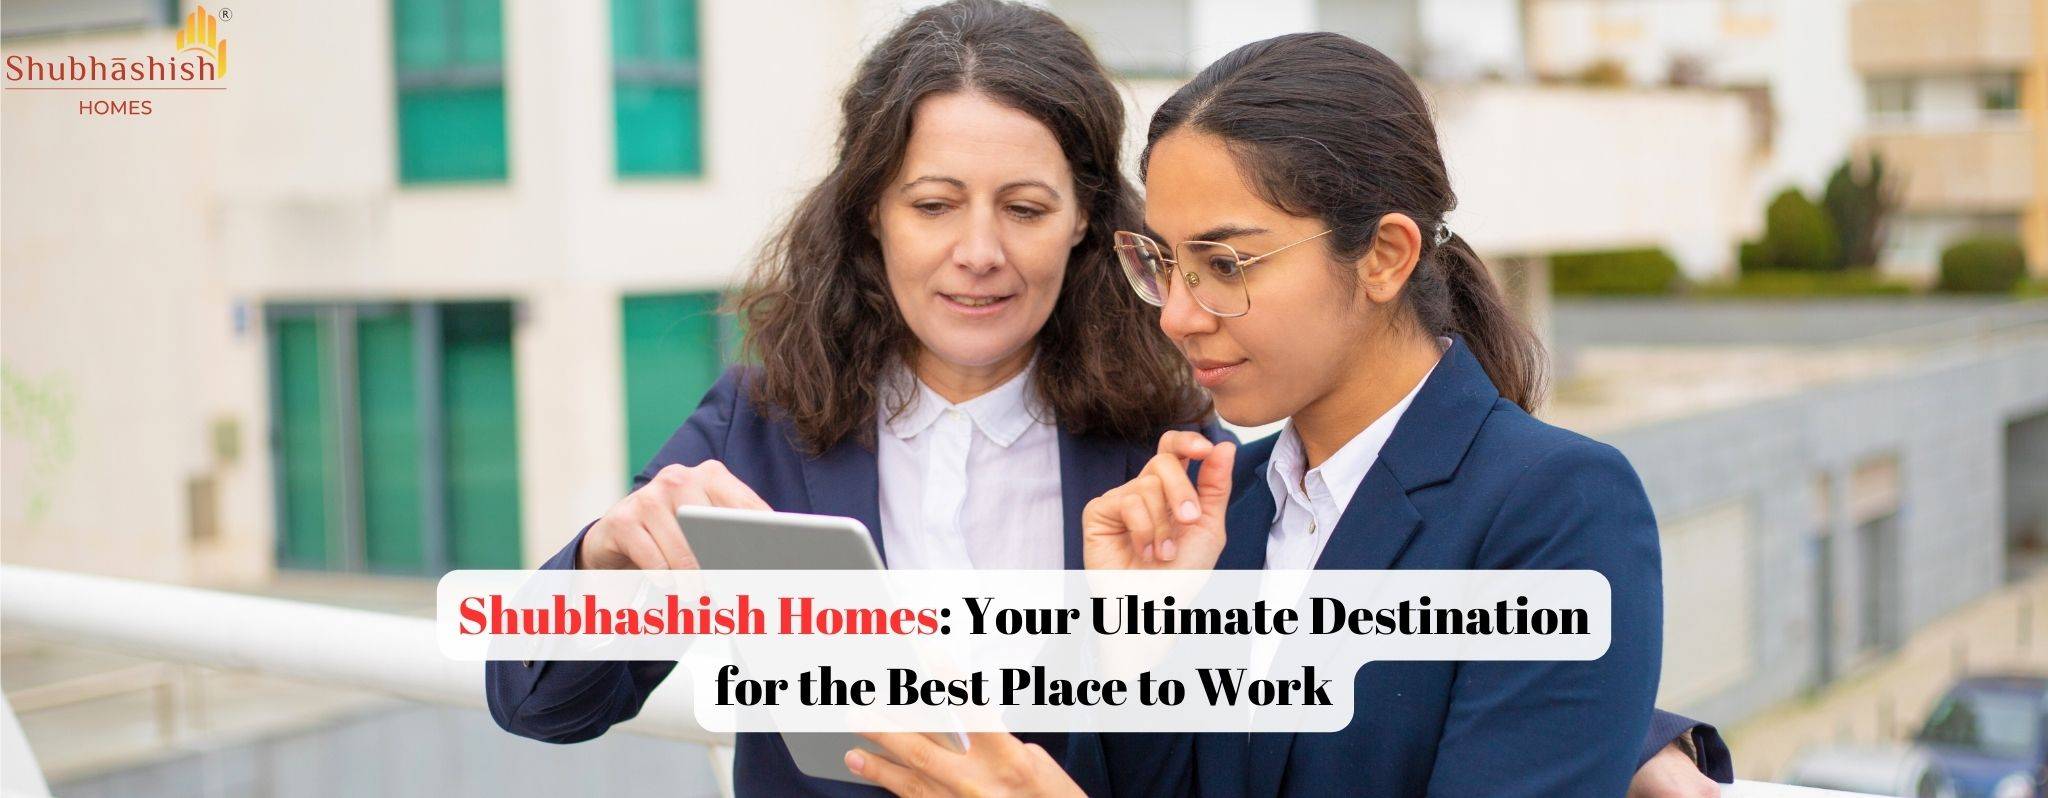 Shubhashish Homes: Your Ultimate Destination for the Best Place to Work